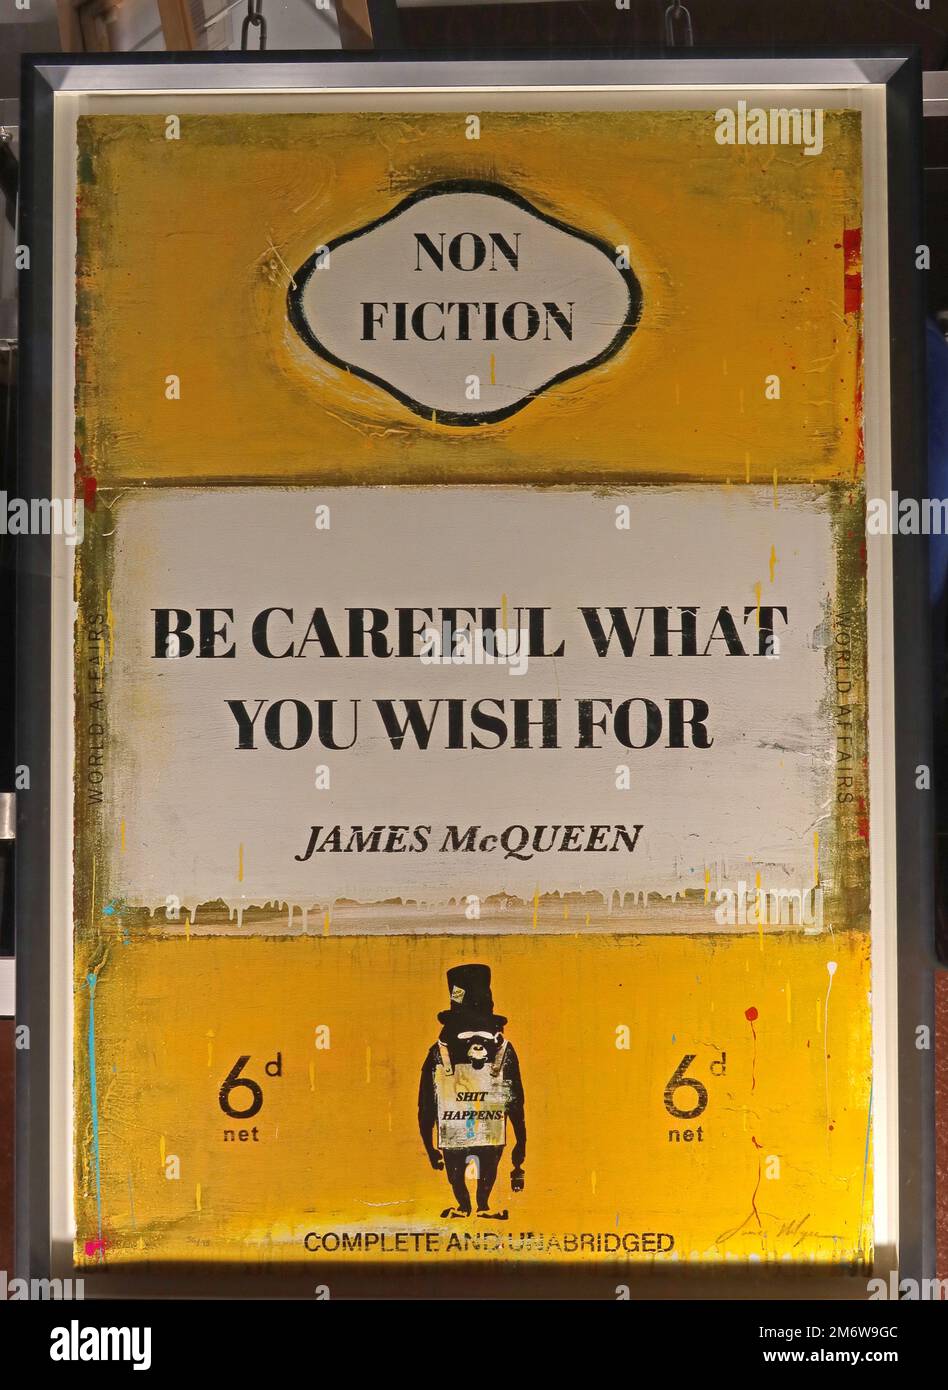 Framed James McQueen yellow book cover, Be Careful What You Wish For, 6d, Penguin, Non-Fiction Stock Photo